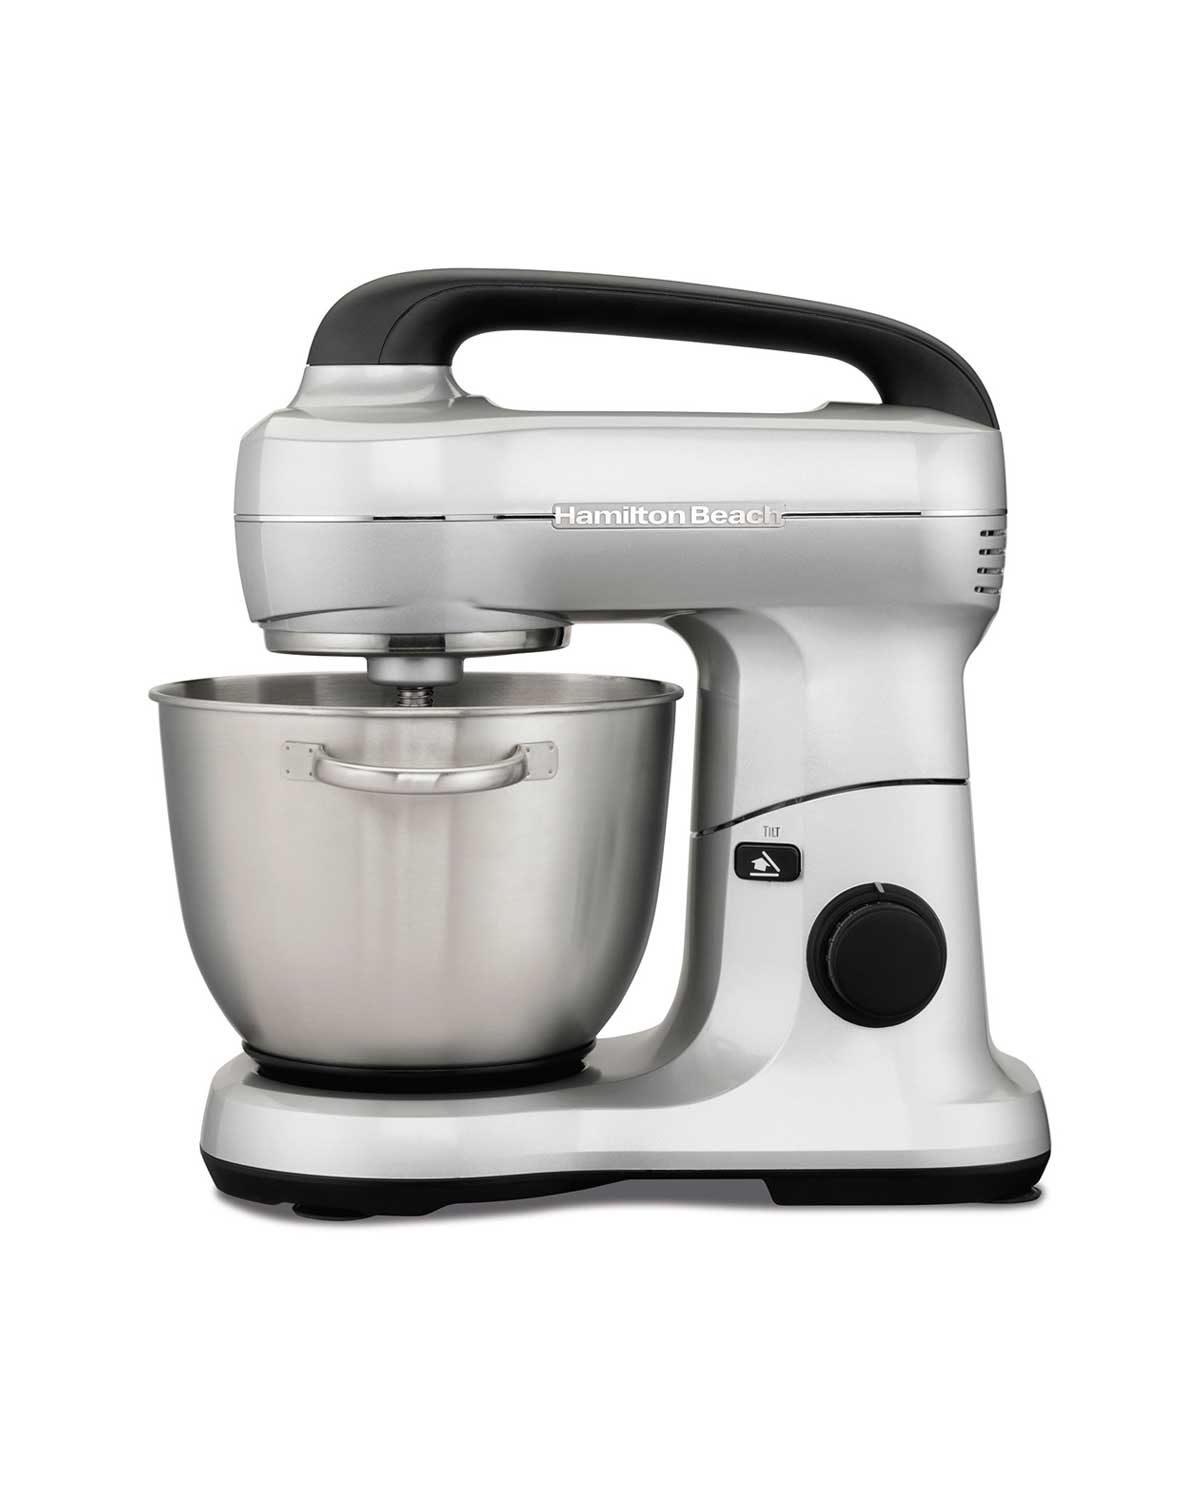 A silver Hamilton Beach mixer in answer to the question, 'is KitchenAid the holy grail of mixers?'